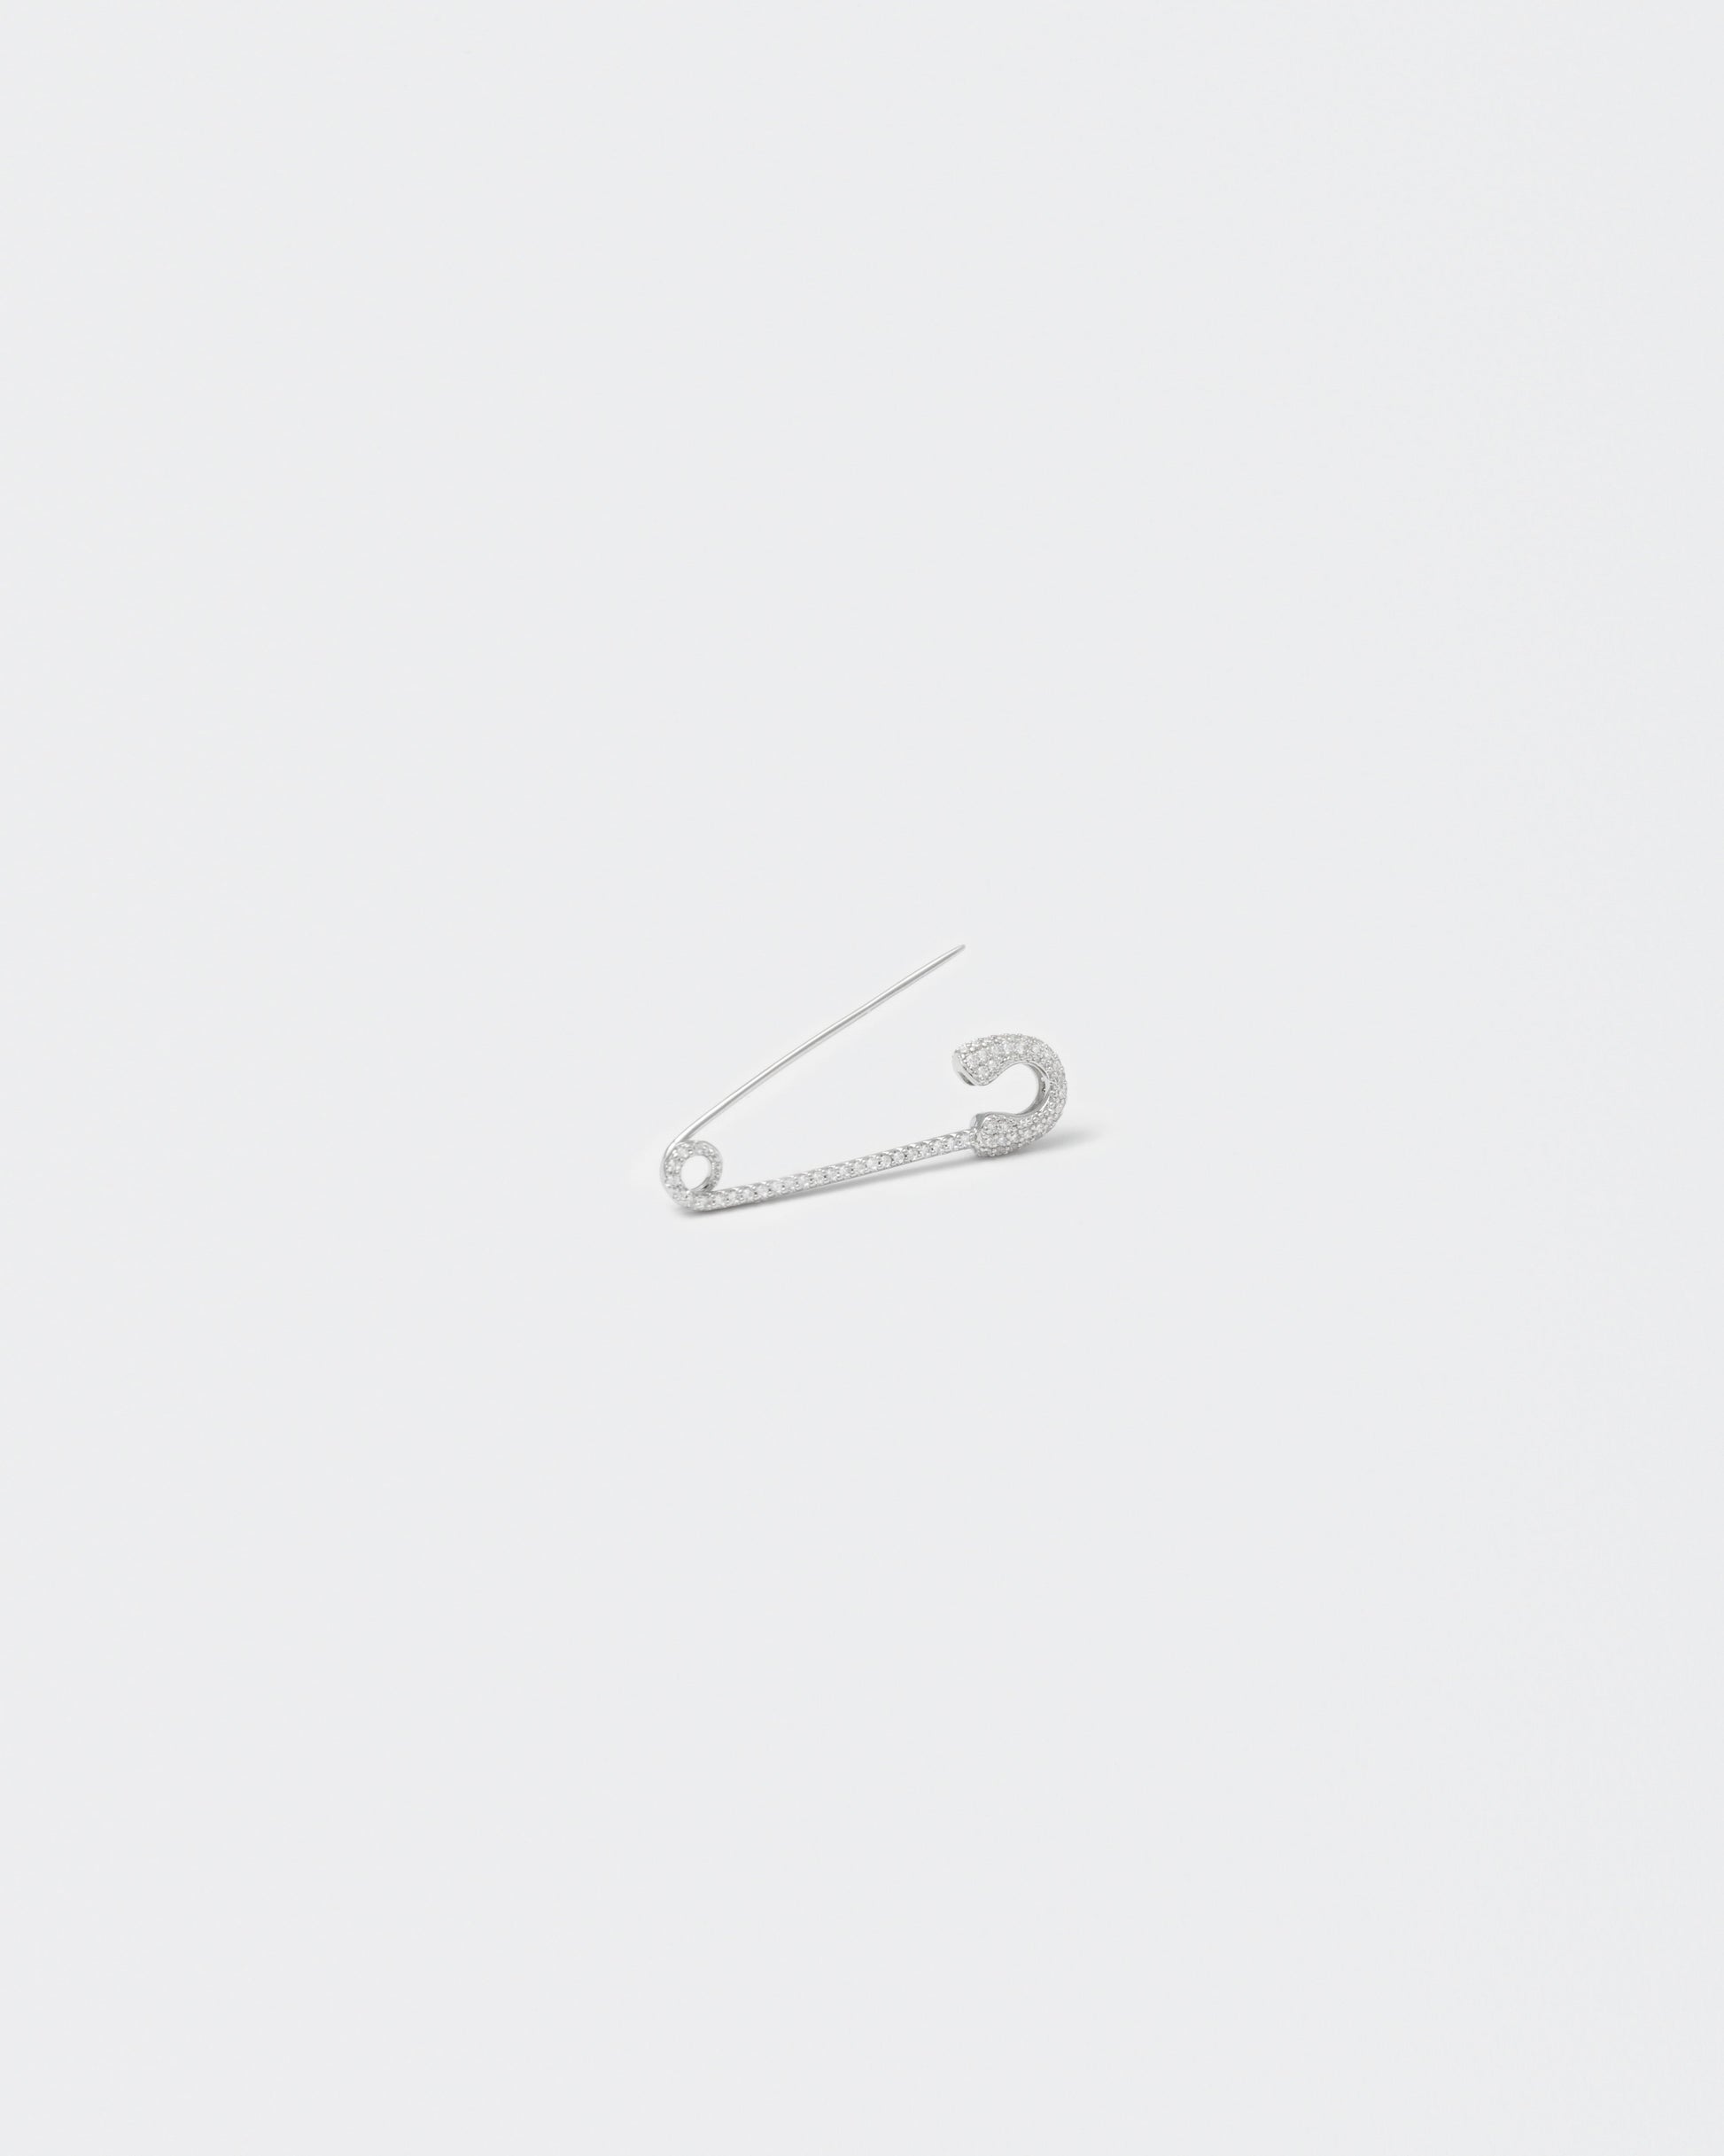 18k white gold coated safety pin mono earring with all-around hand-set micropavé stones in white